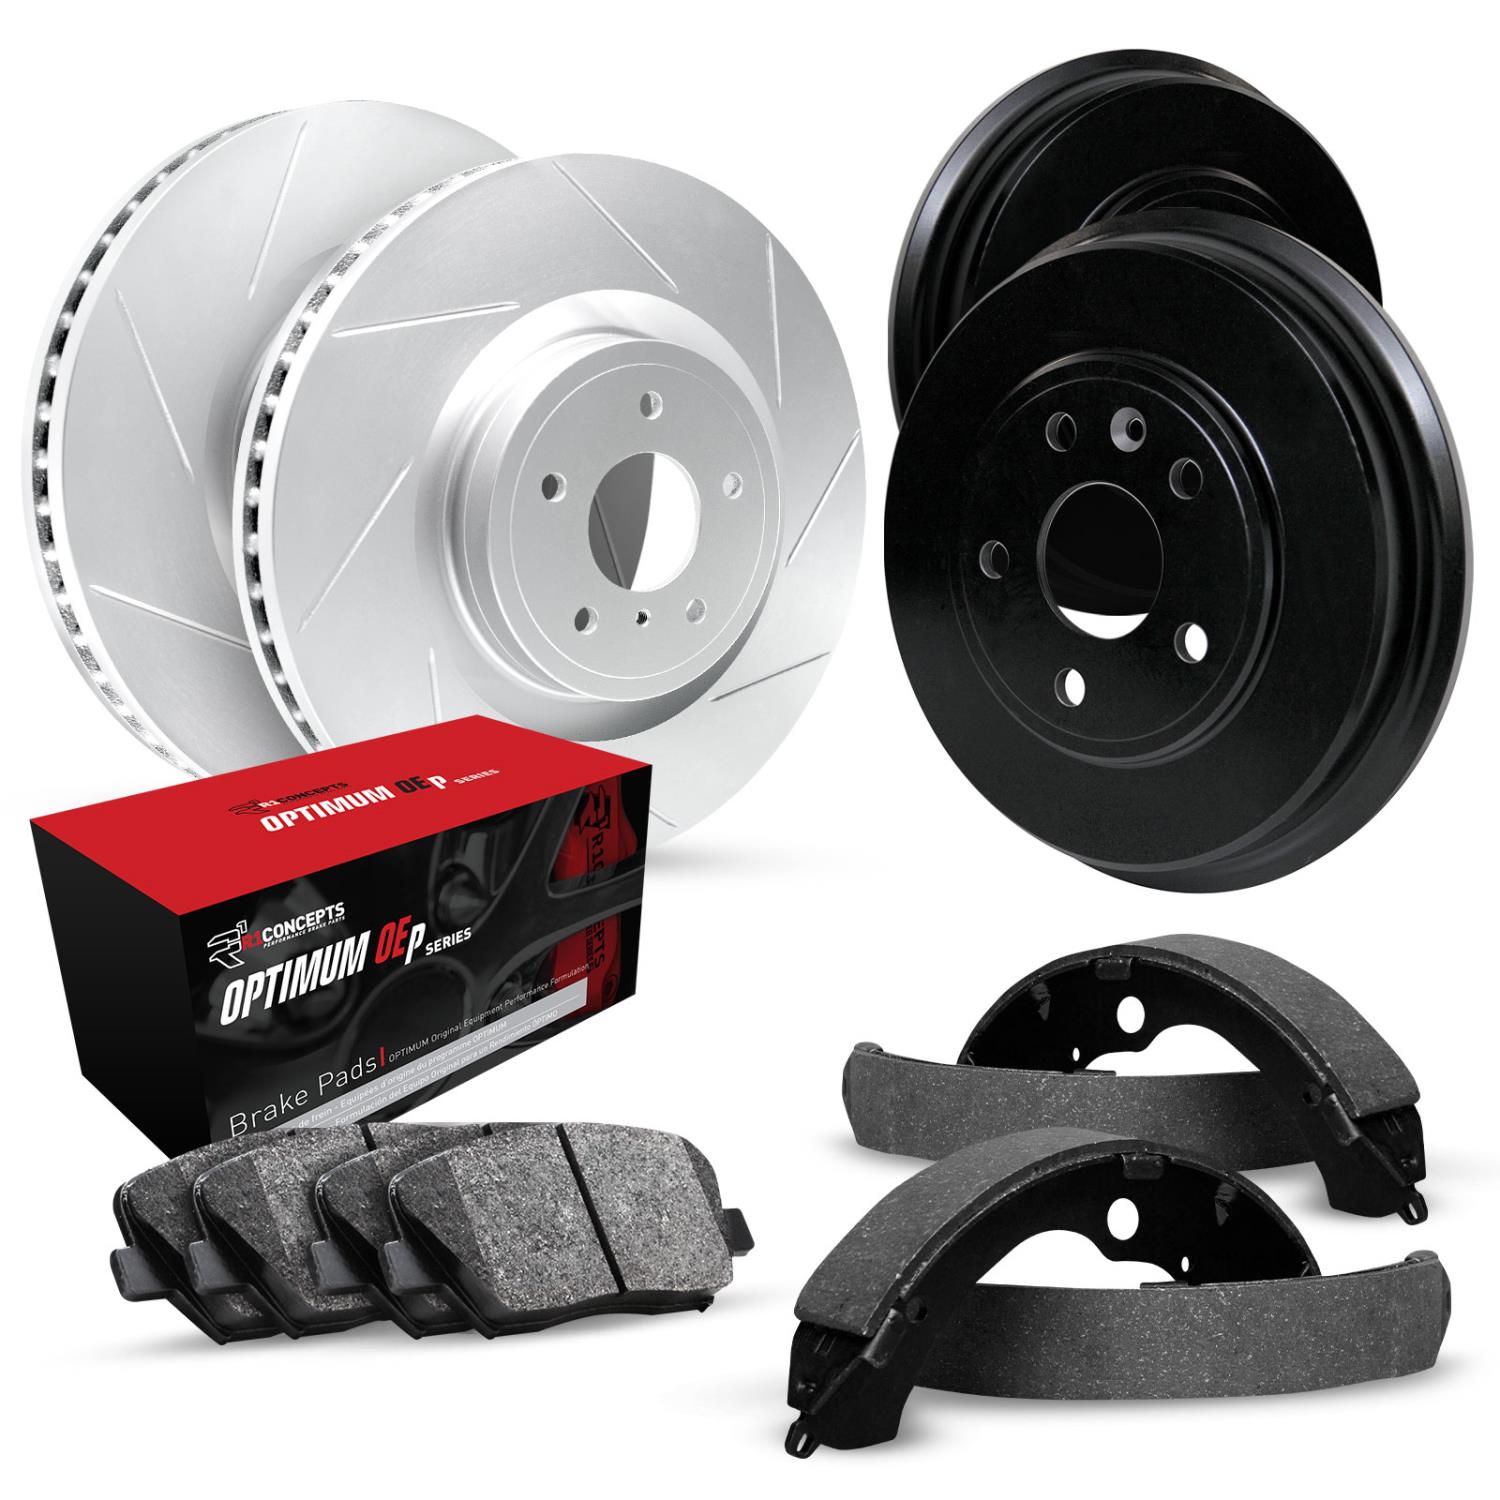 GEO-Carbon Slotted Brake Rotor & Drum Set w/Optimum OE Pads & Shoes, 1993-2002 Fits Multiple Makes/Models